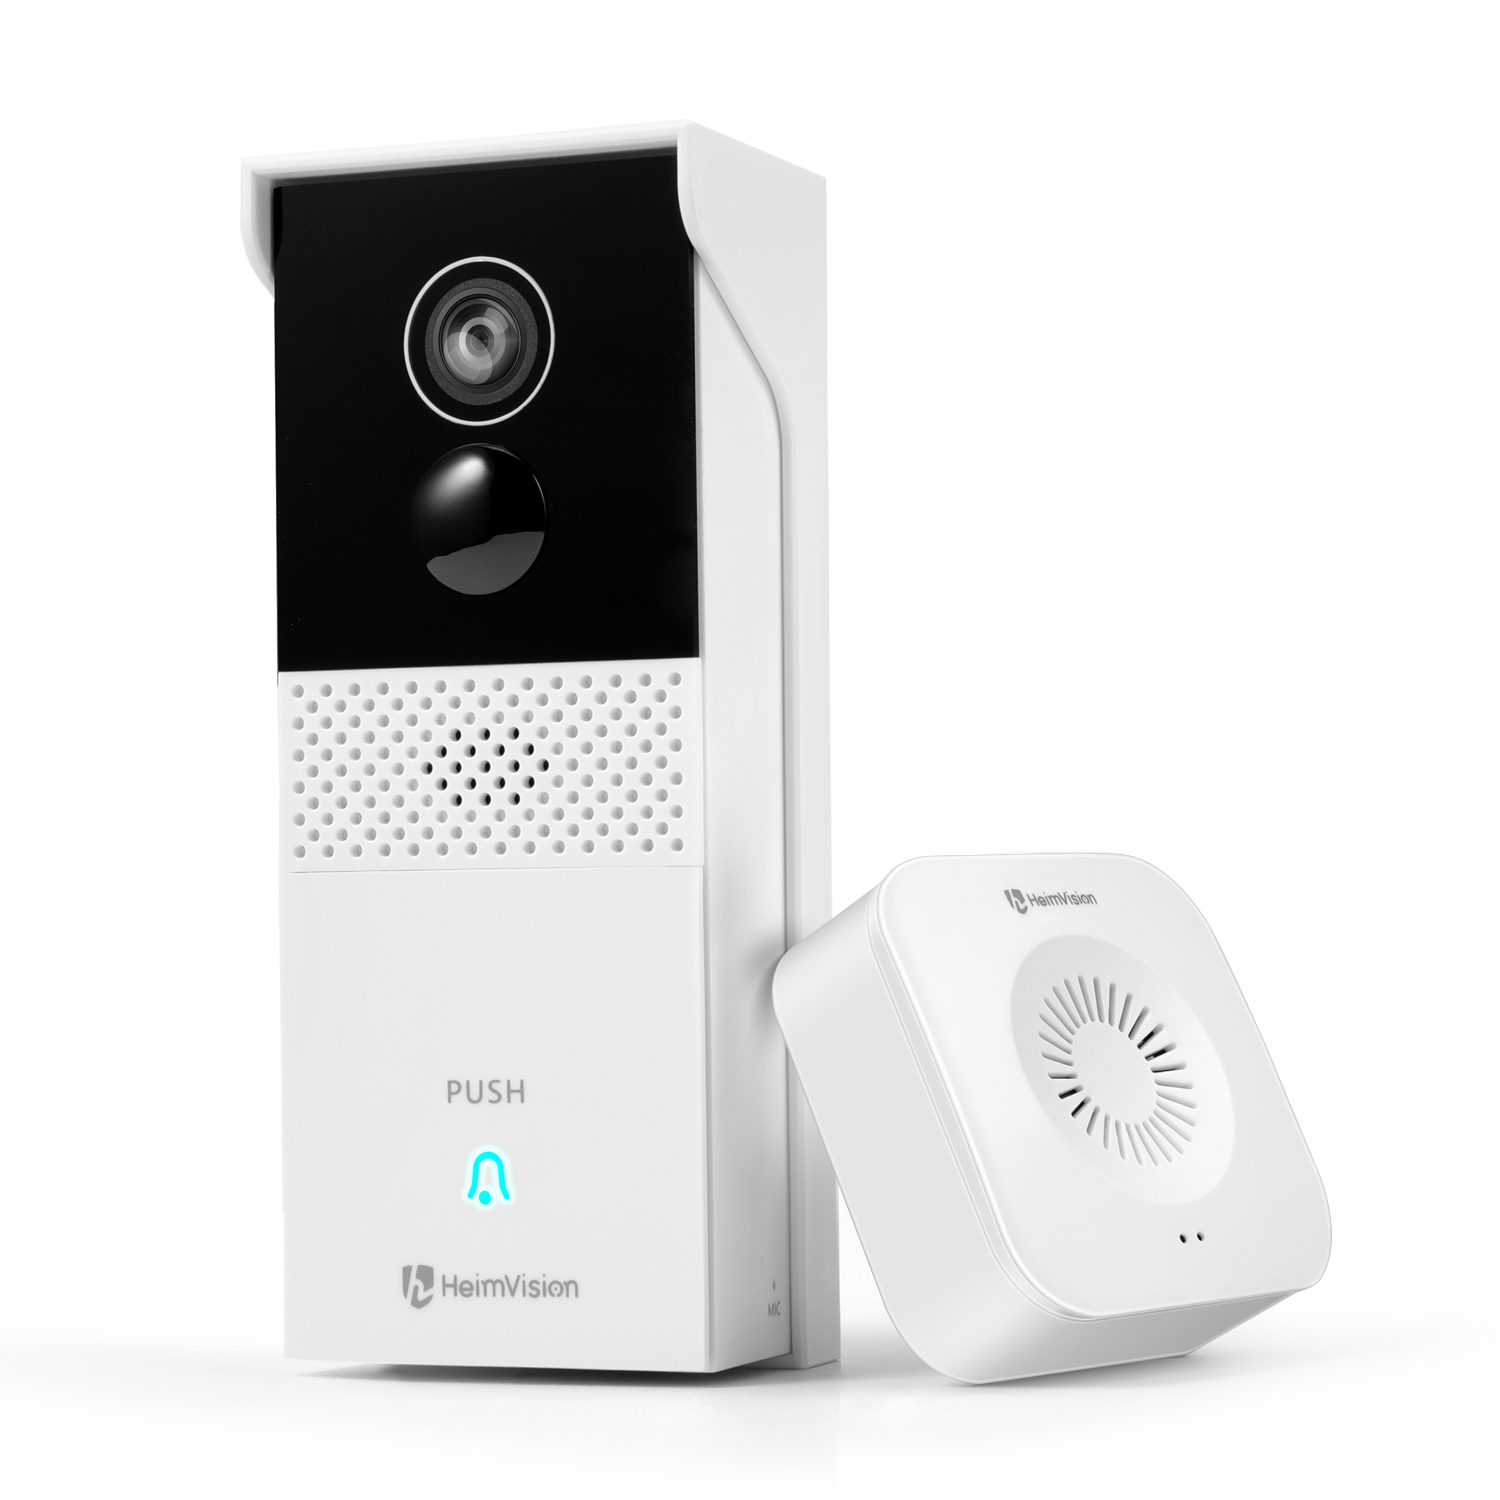 HeimVision HMB1 Video Doorbell Camera Wireless, 1080P WiFi Smart Doorbell With Chime For Home Security, PIR Motion Detection, Two-Way Talk, Night Vision, Waterproof, App Remote Control, Cloud Service